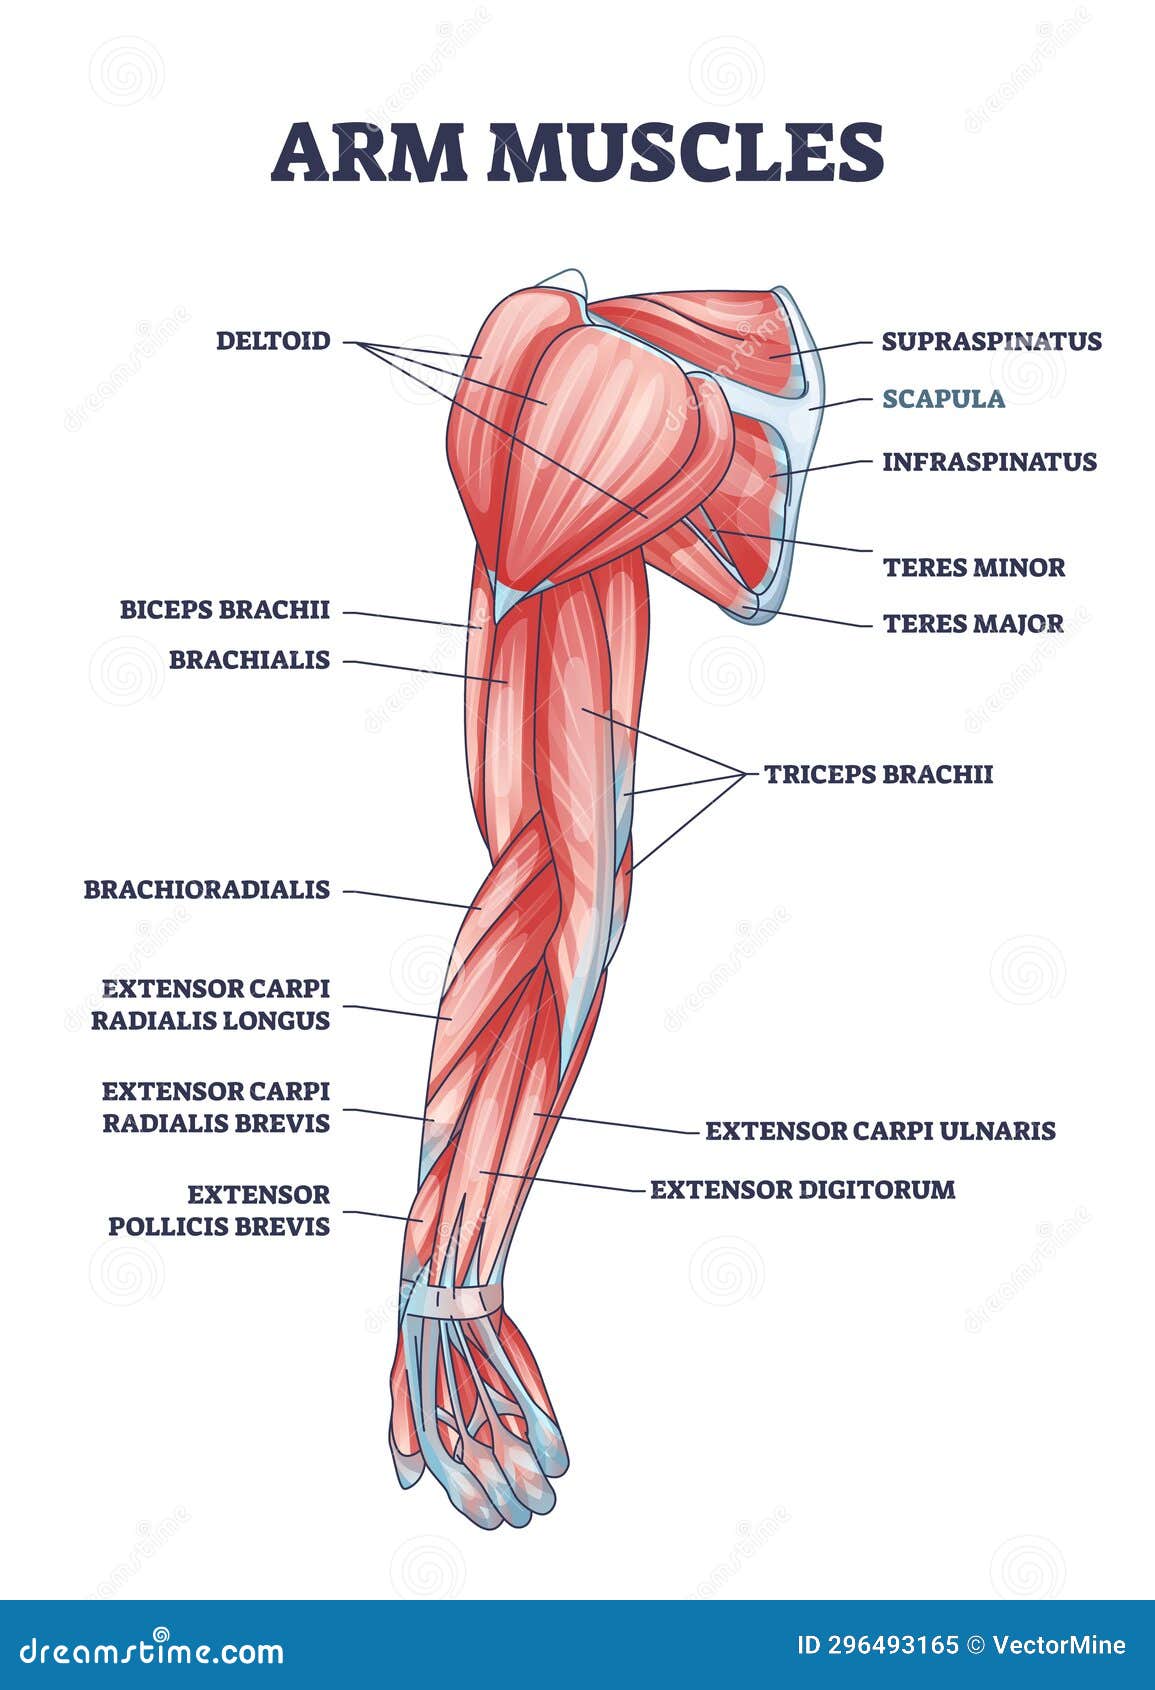 arm muscles medical description with labeled latin titles outline diagram